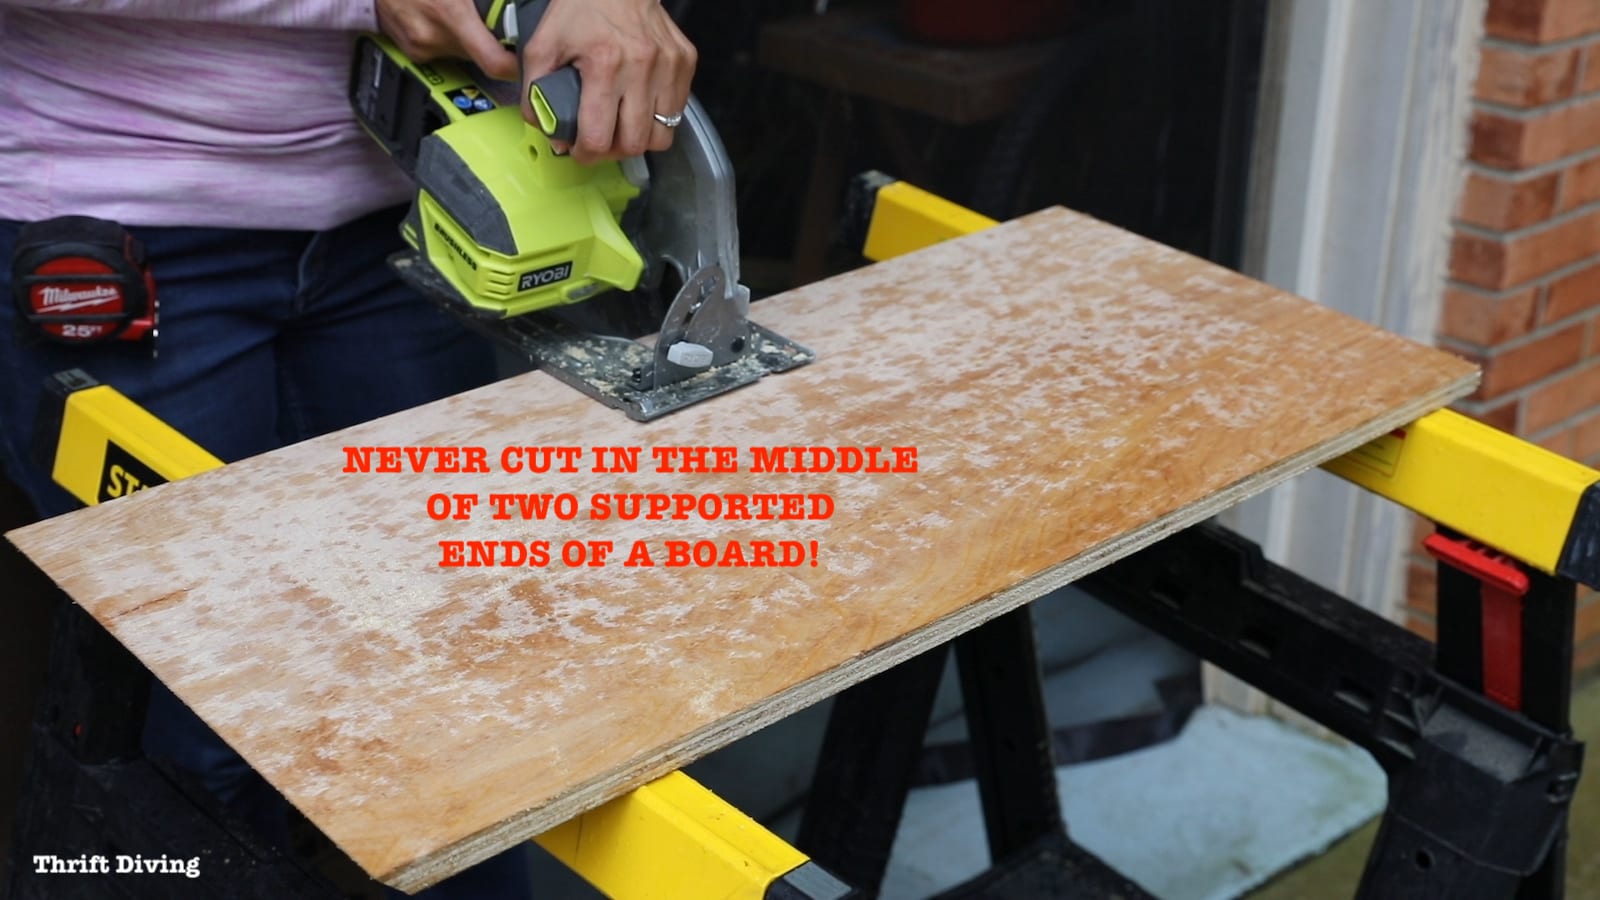 Circular Saw Blades: Be sure to NEVER cut a board in the middle when supported by two ends. Otherwise, the blade will stop and be pinched, resulting in possible dangerous kick-back. learn more about how to use a circular saw and its blades. - Thrift Diving 